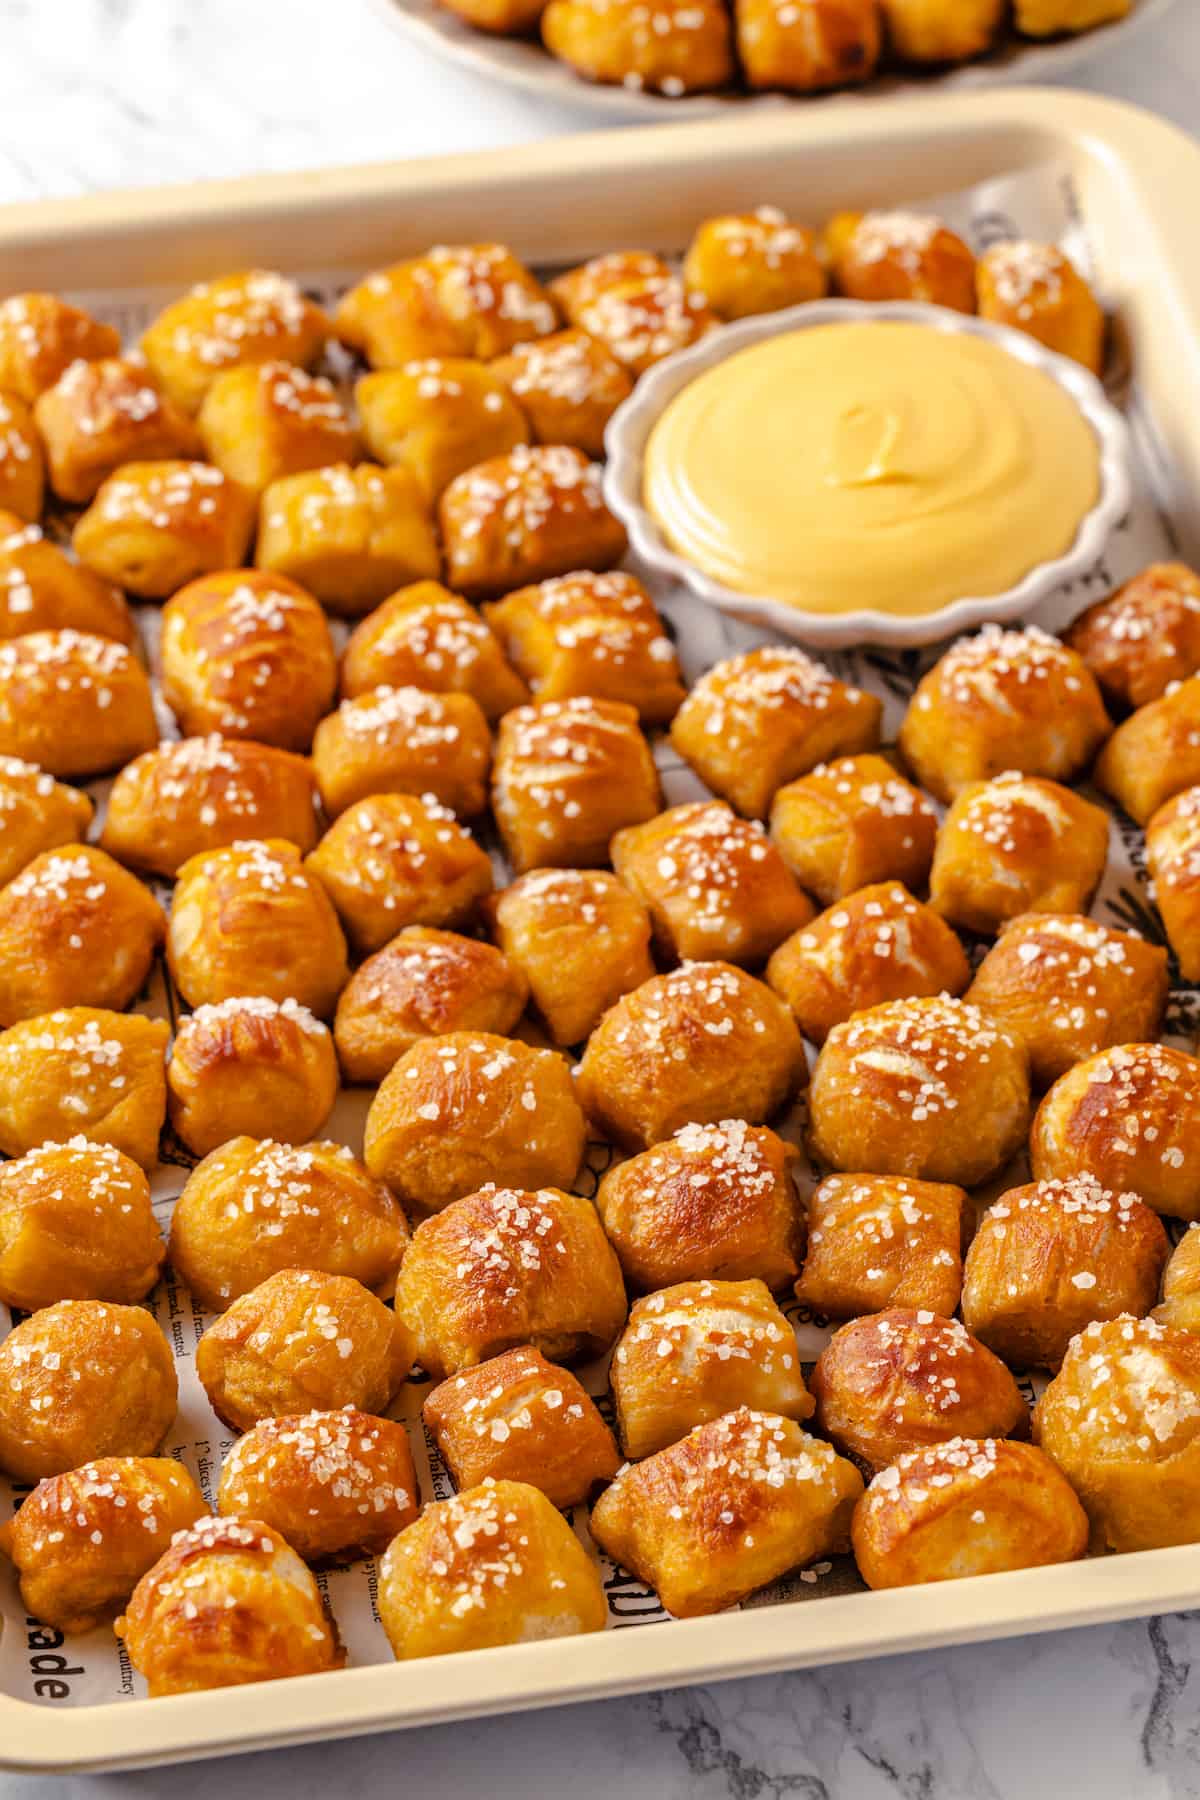 Tray of pretzel bites with bowl of cheese dip